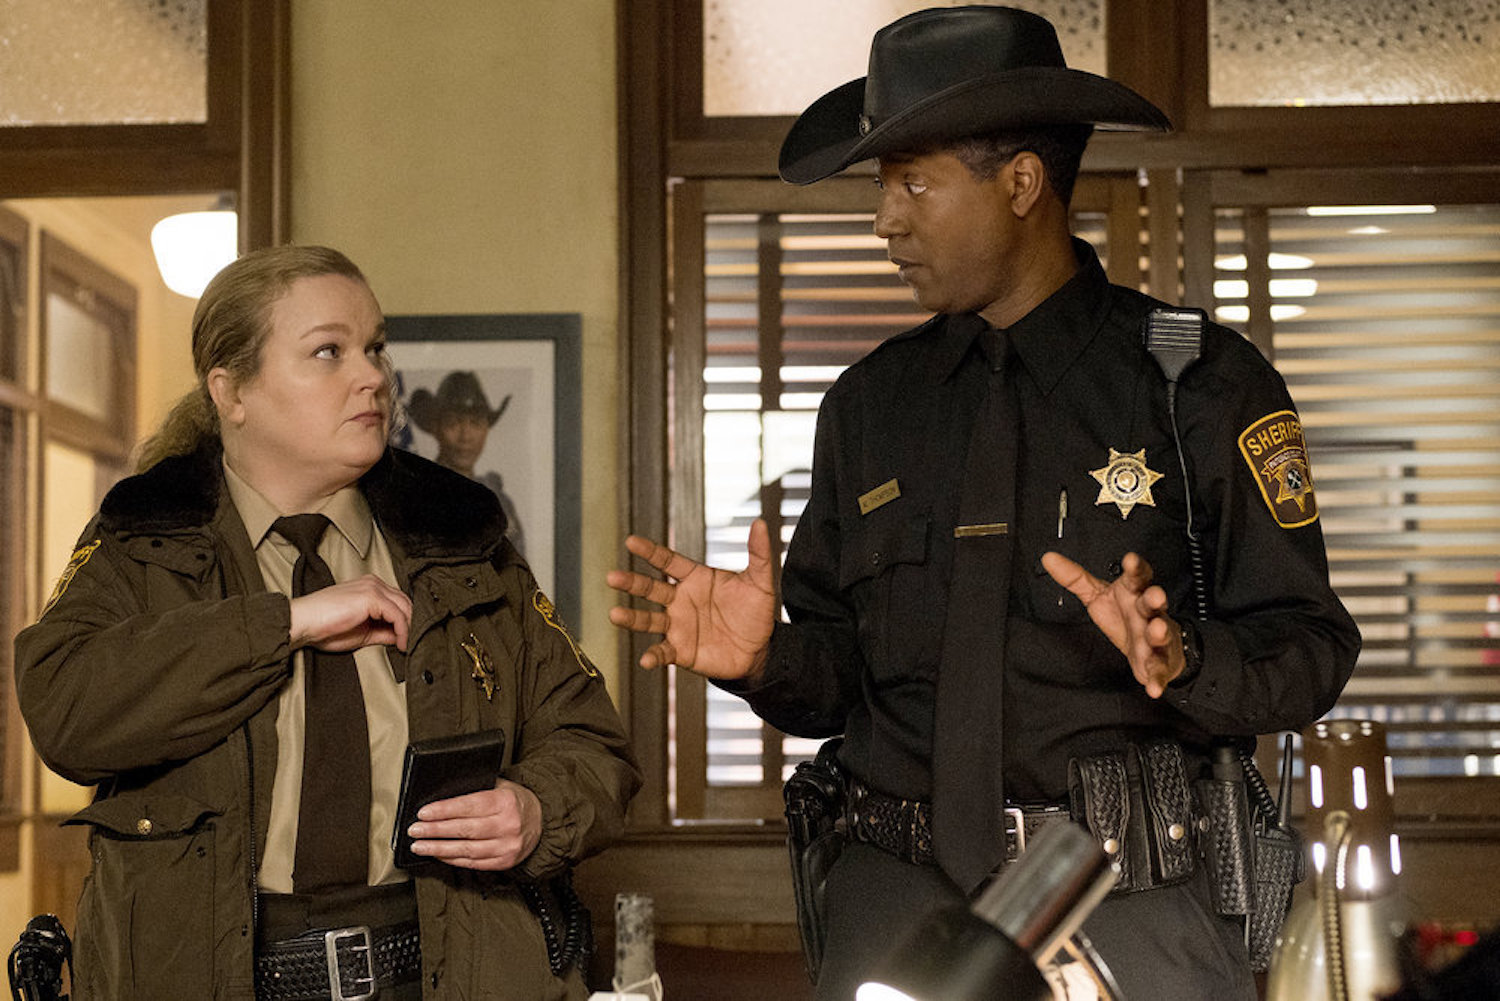 Sheriff Thompson and his deputy Liv Baker talk in his office